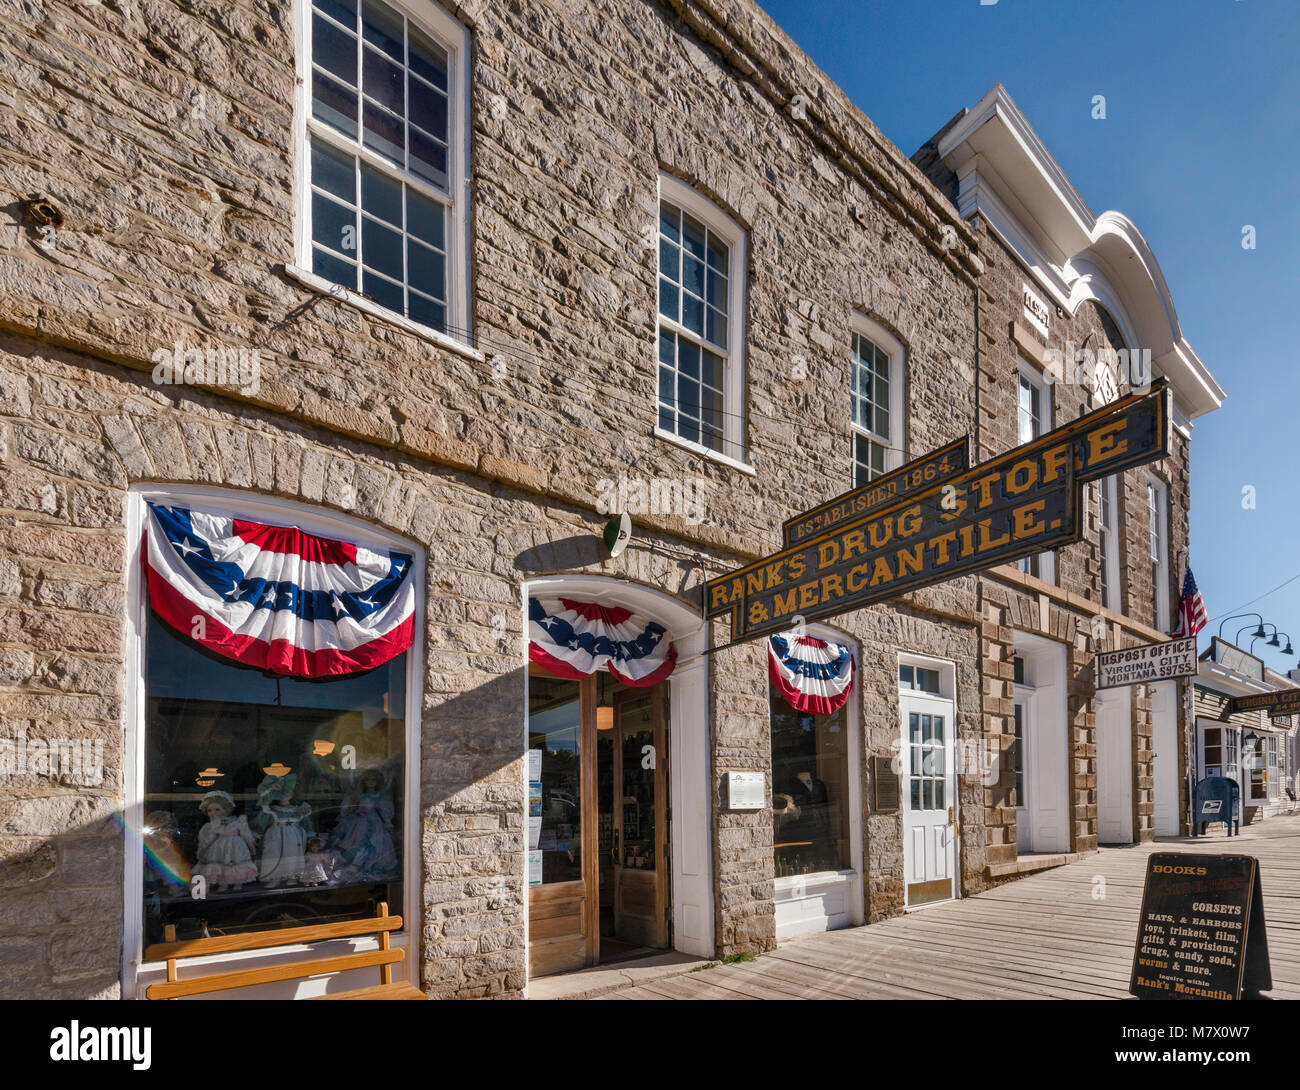 Pfouts and Russell (Rank's Drug store, Old Masonic Temple) in ghost town of Virginia City, Montana, USA Stock Photo